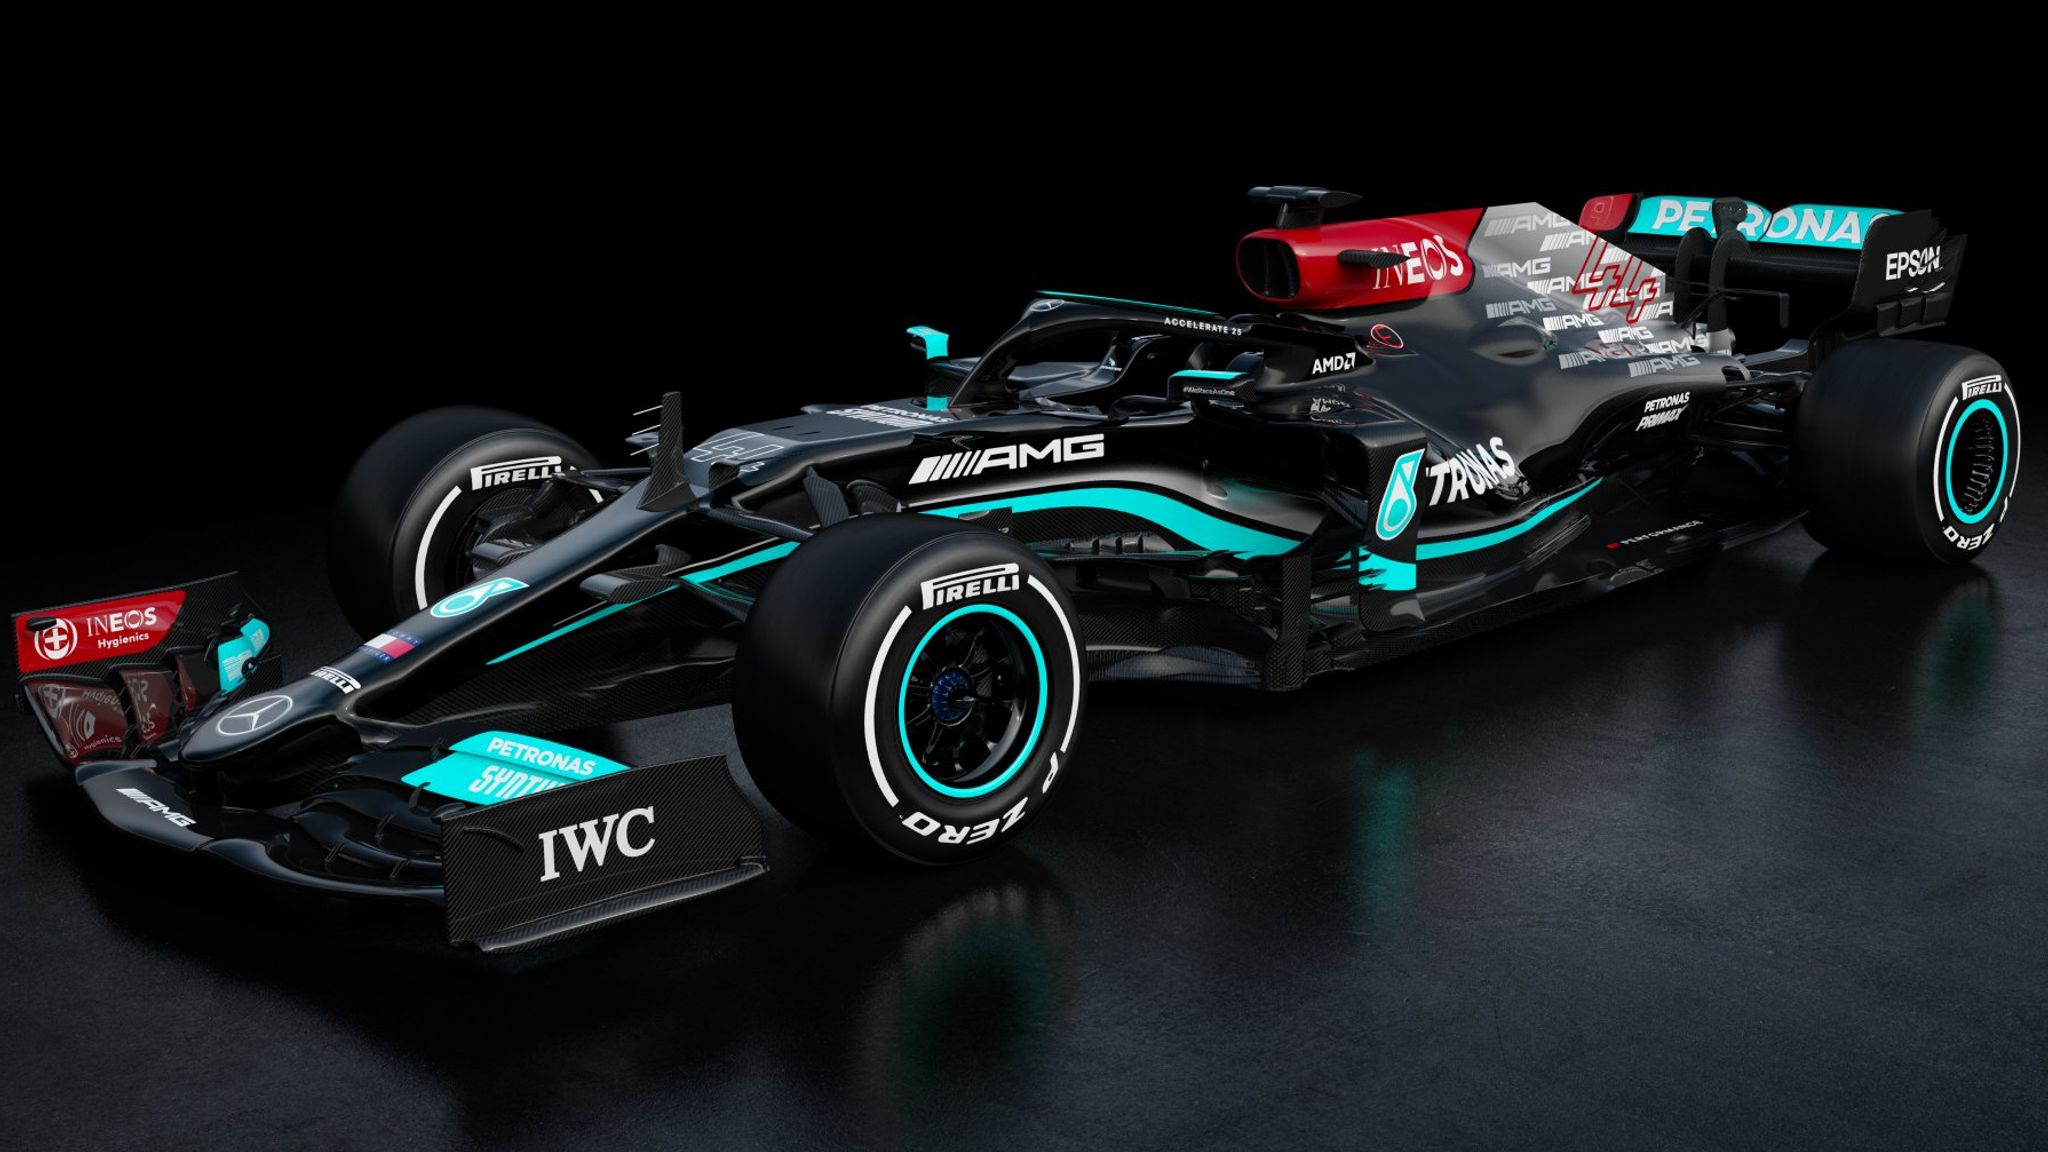 f1 car launches talking points from 2021 so far ahead of mercedes alpine and aston martin reveals f1 news on fi car audio team v3